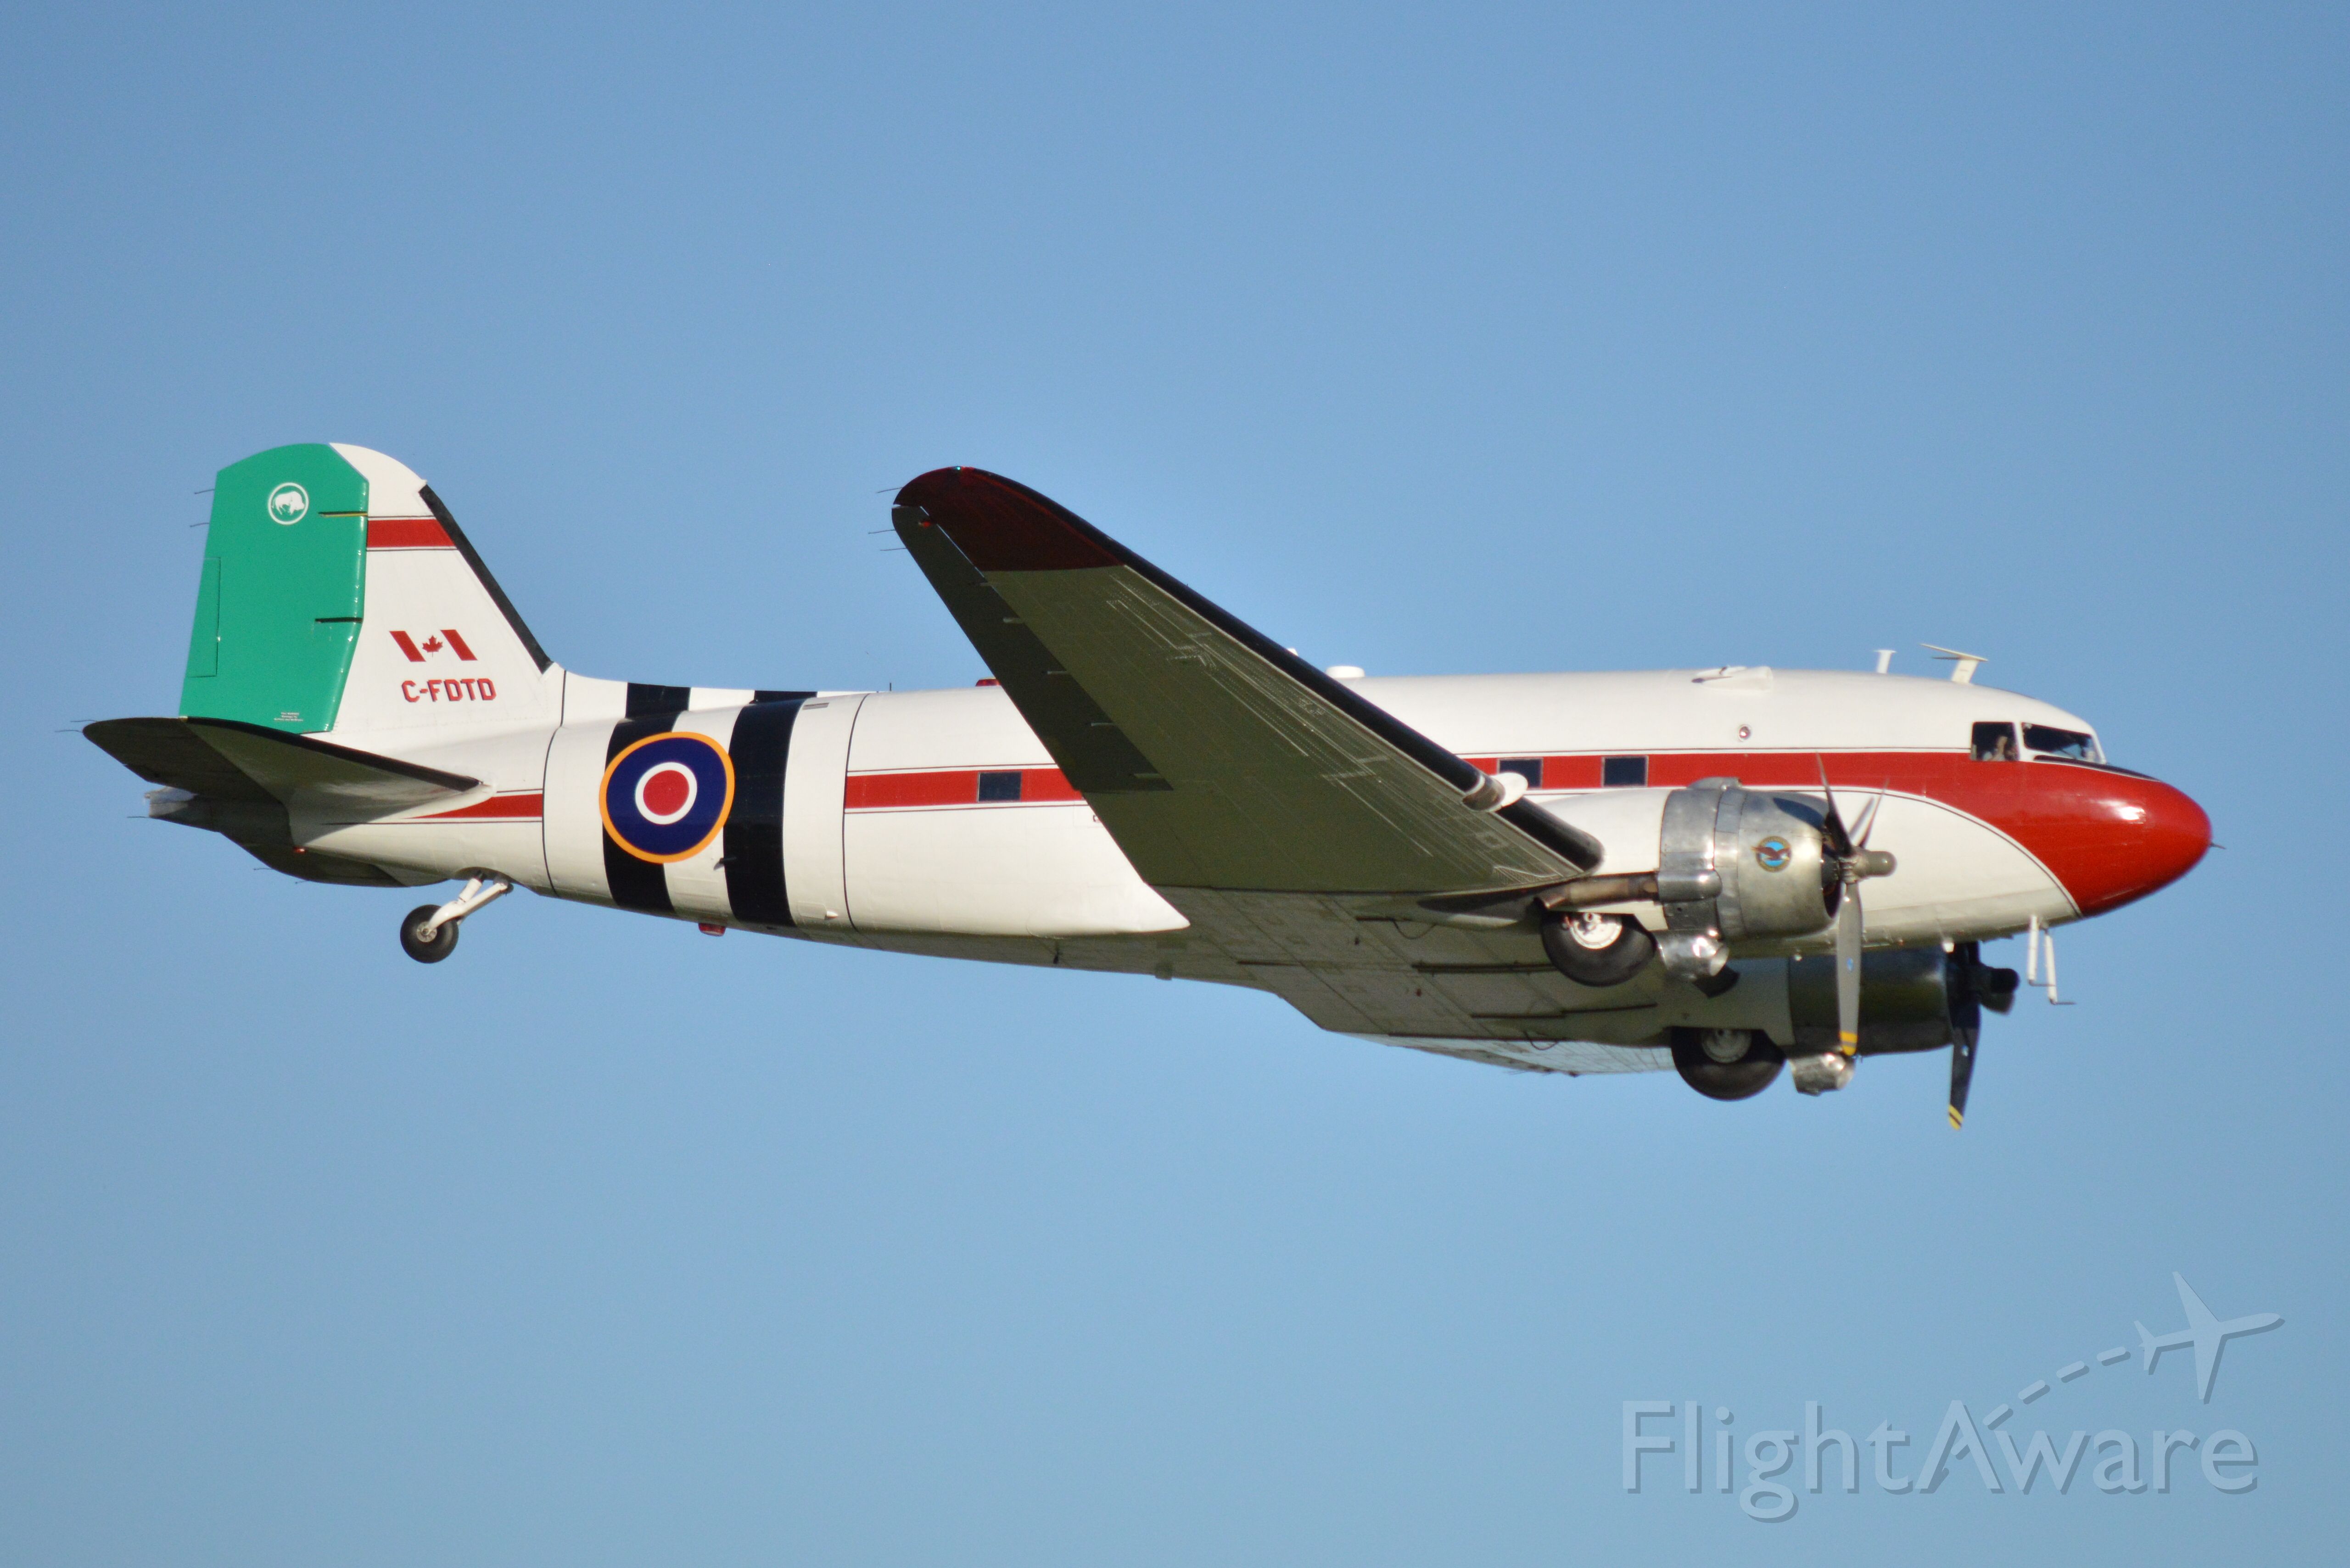 Douglas DC-3 (C-FDTD) - First flight in nearly 30 years. Built in 1944, served in the RAF (FZ668), veteran of D-Day. After the war, he served for Trans Canada Airlines (CF-TER), transfered to the canadian Ministère des Transports (CF-DTD). On june 6th 2019, he's back in the air.